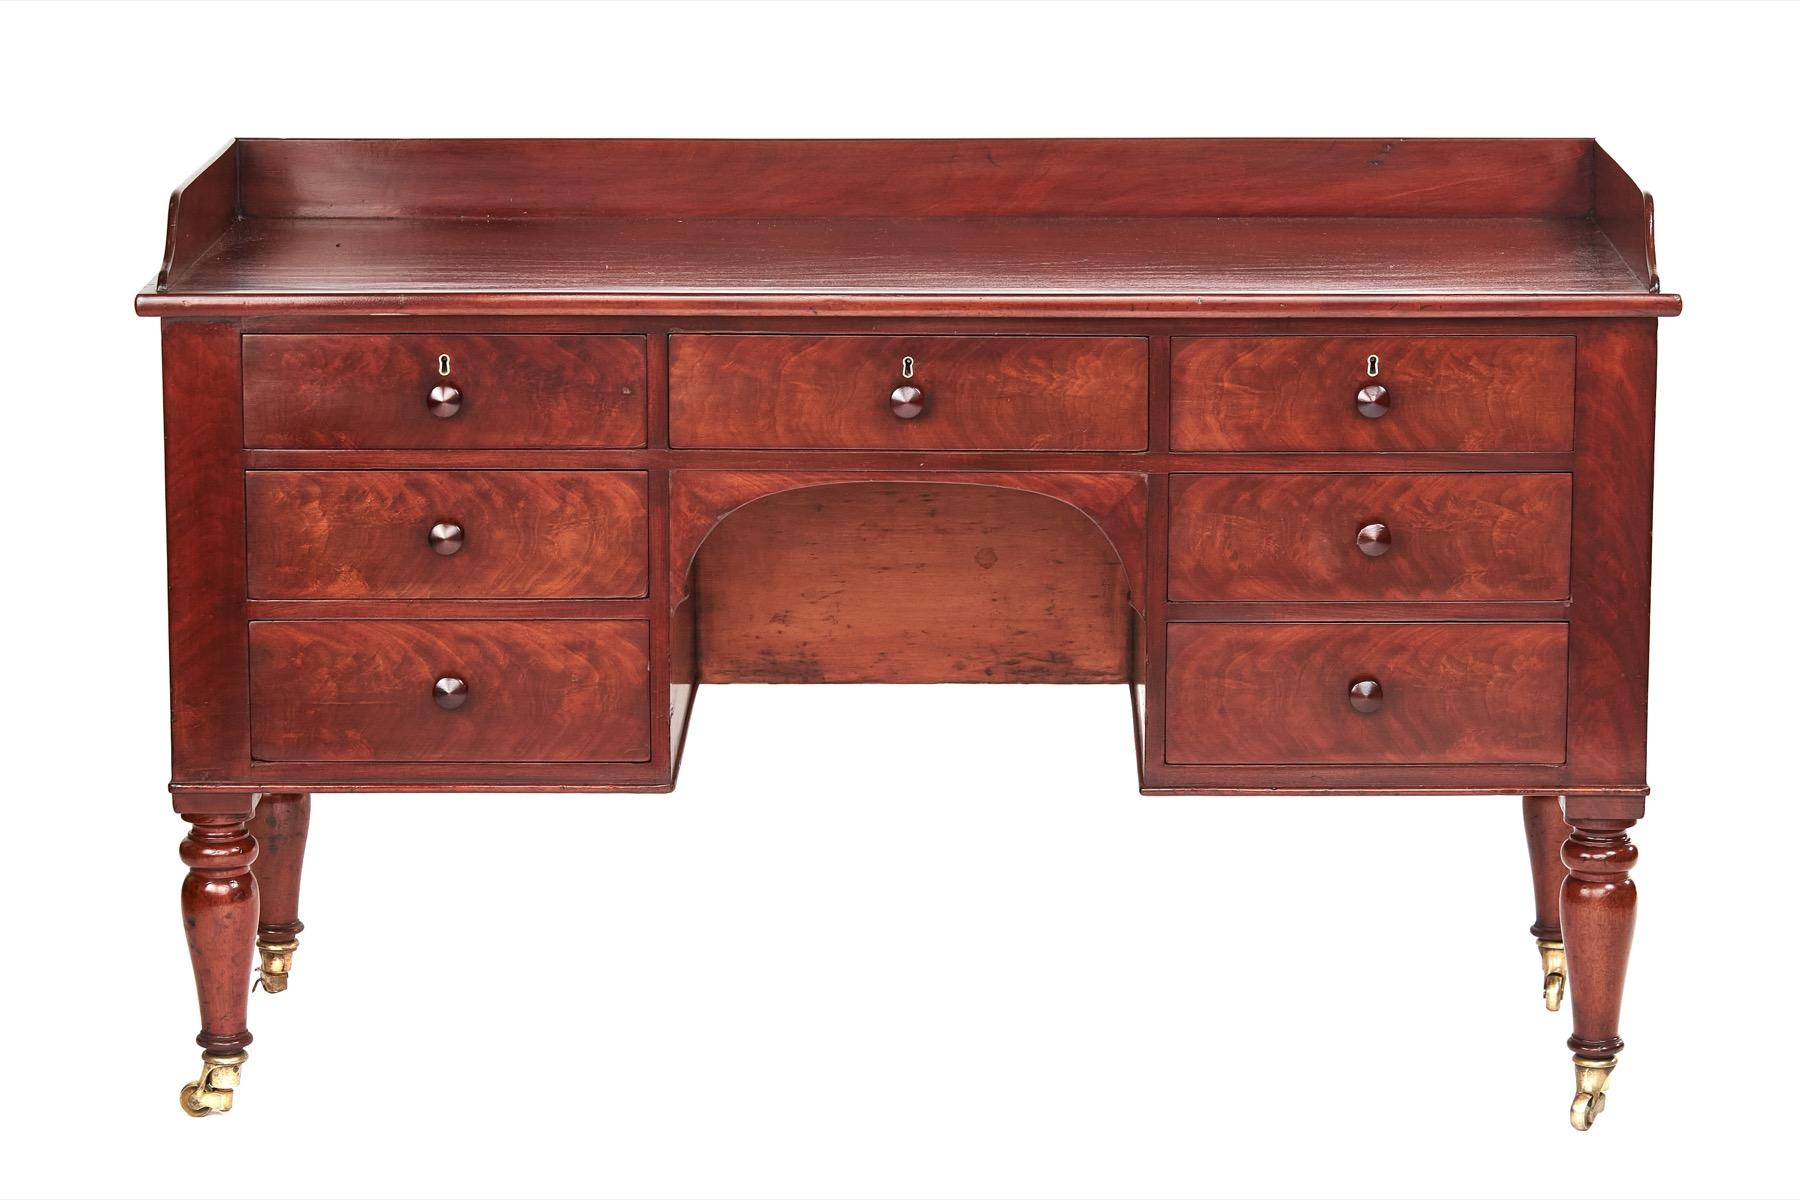 William IV Mahogany Kneehole Dressing Table by Wilkinsons